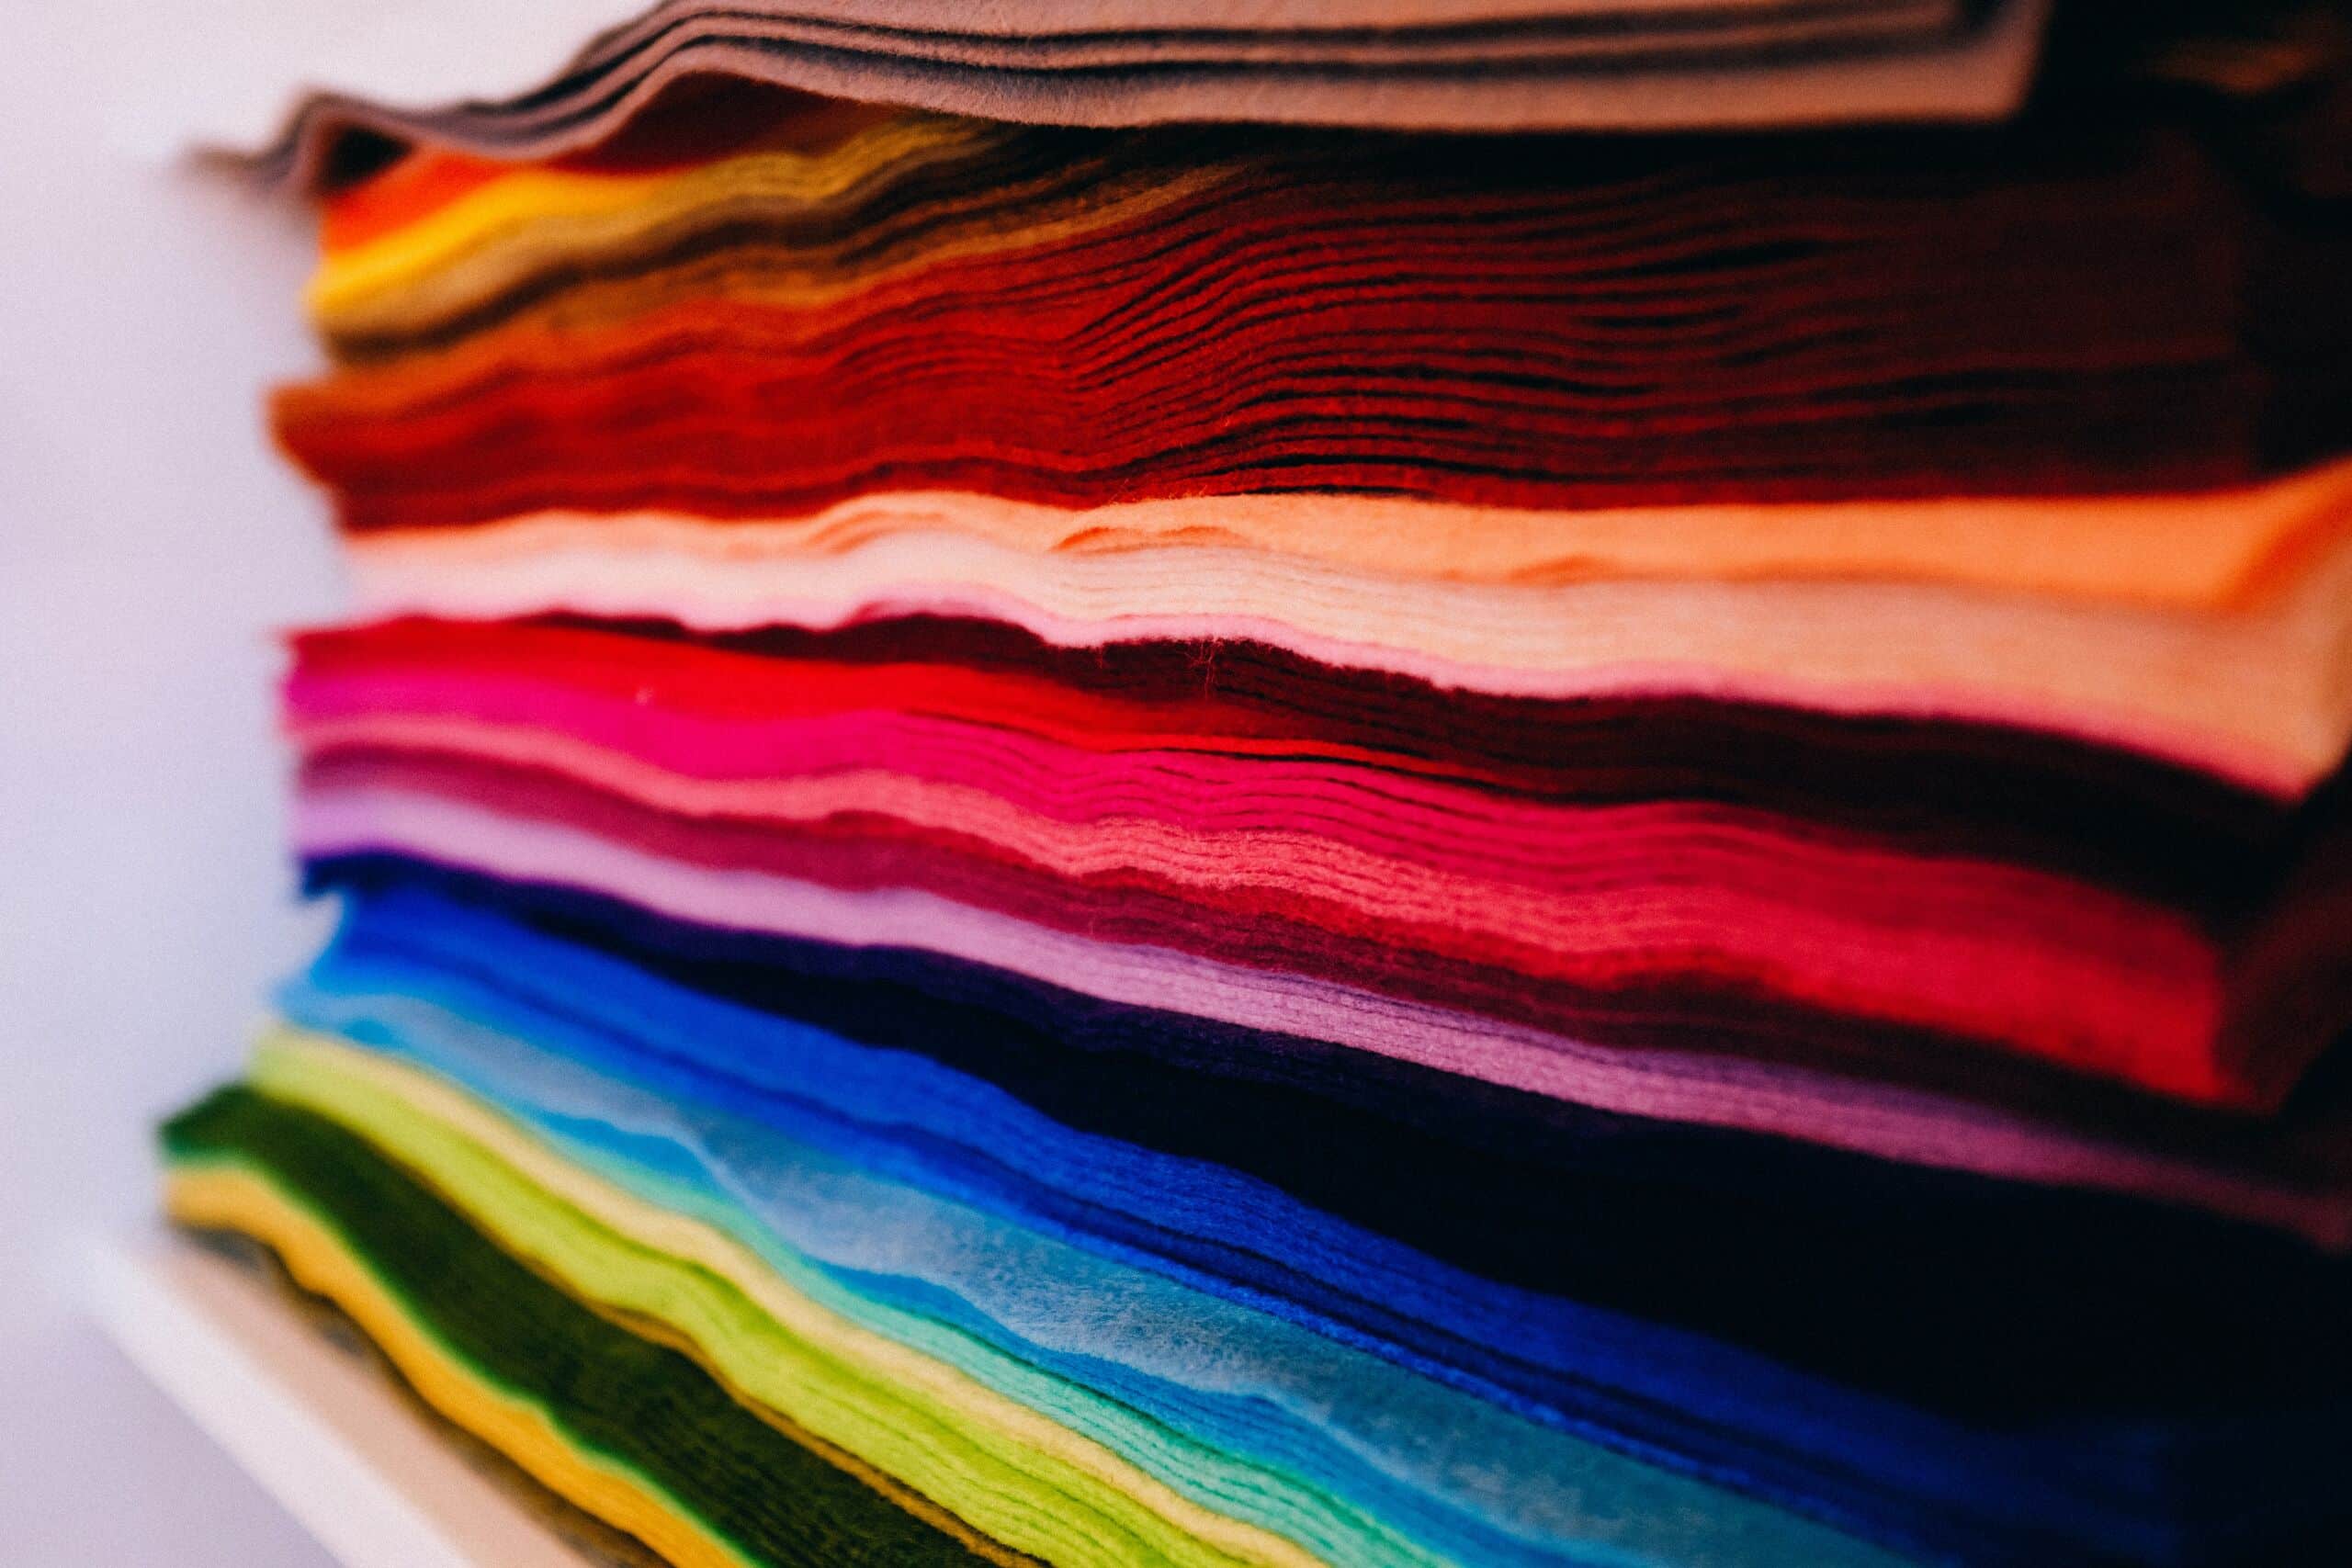 Sustainability-as-Lifeline-for-Europe’s-Textile-Industry-Ohana-Public-Affairs-Consultancy